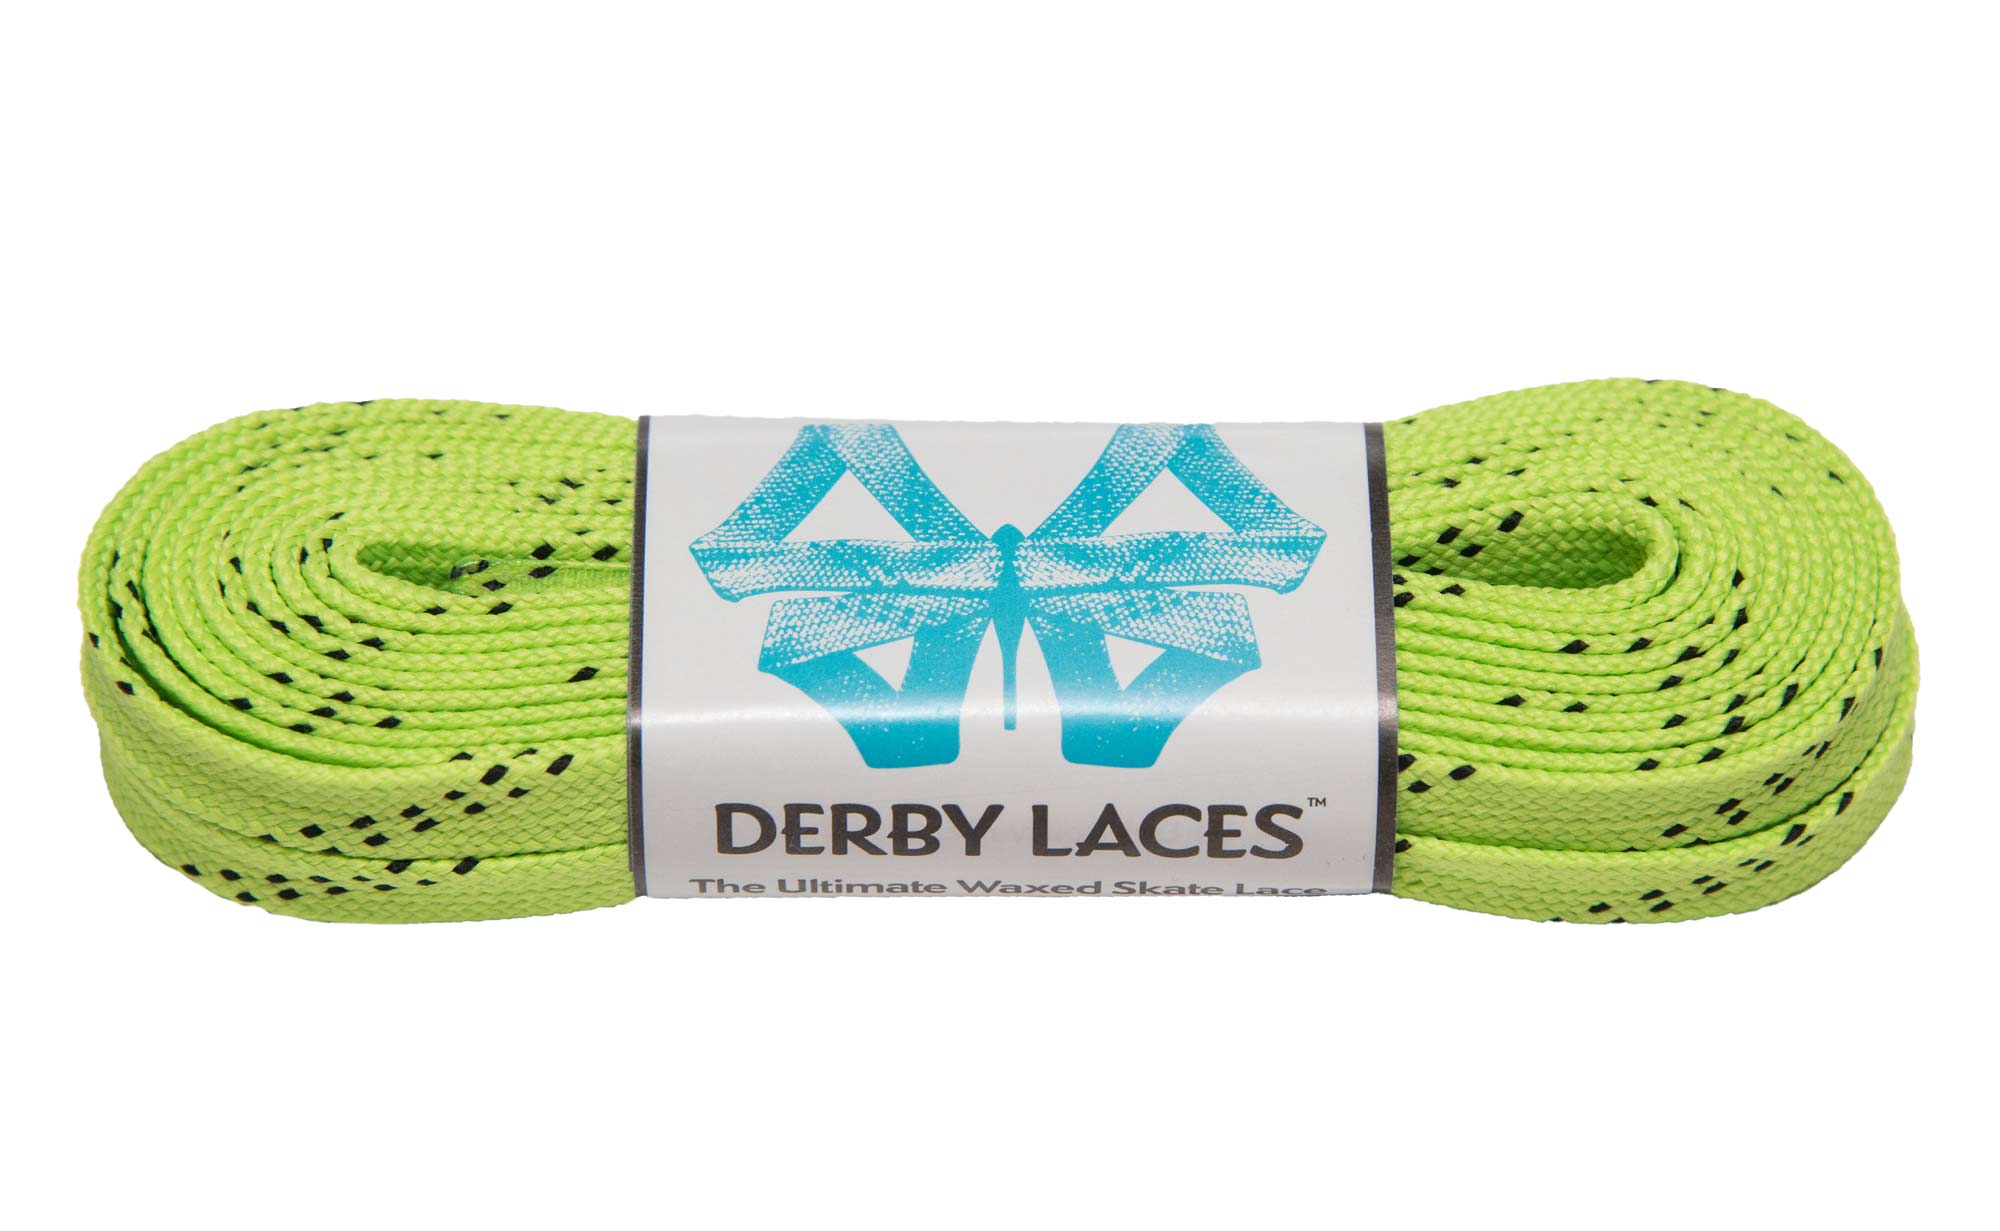 and Boots Derby Laces Orange 108 Inch Waxed Skate Lace for Roller Derby Hockey and Ice Skates 